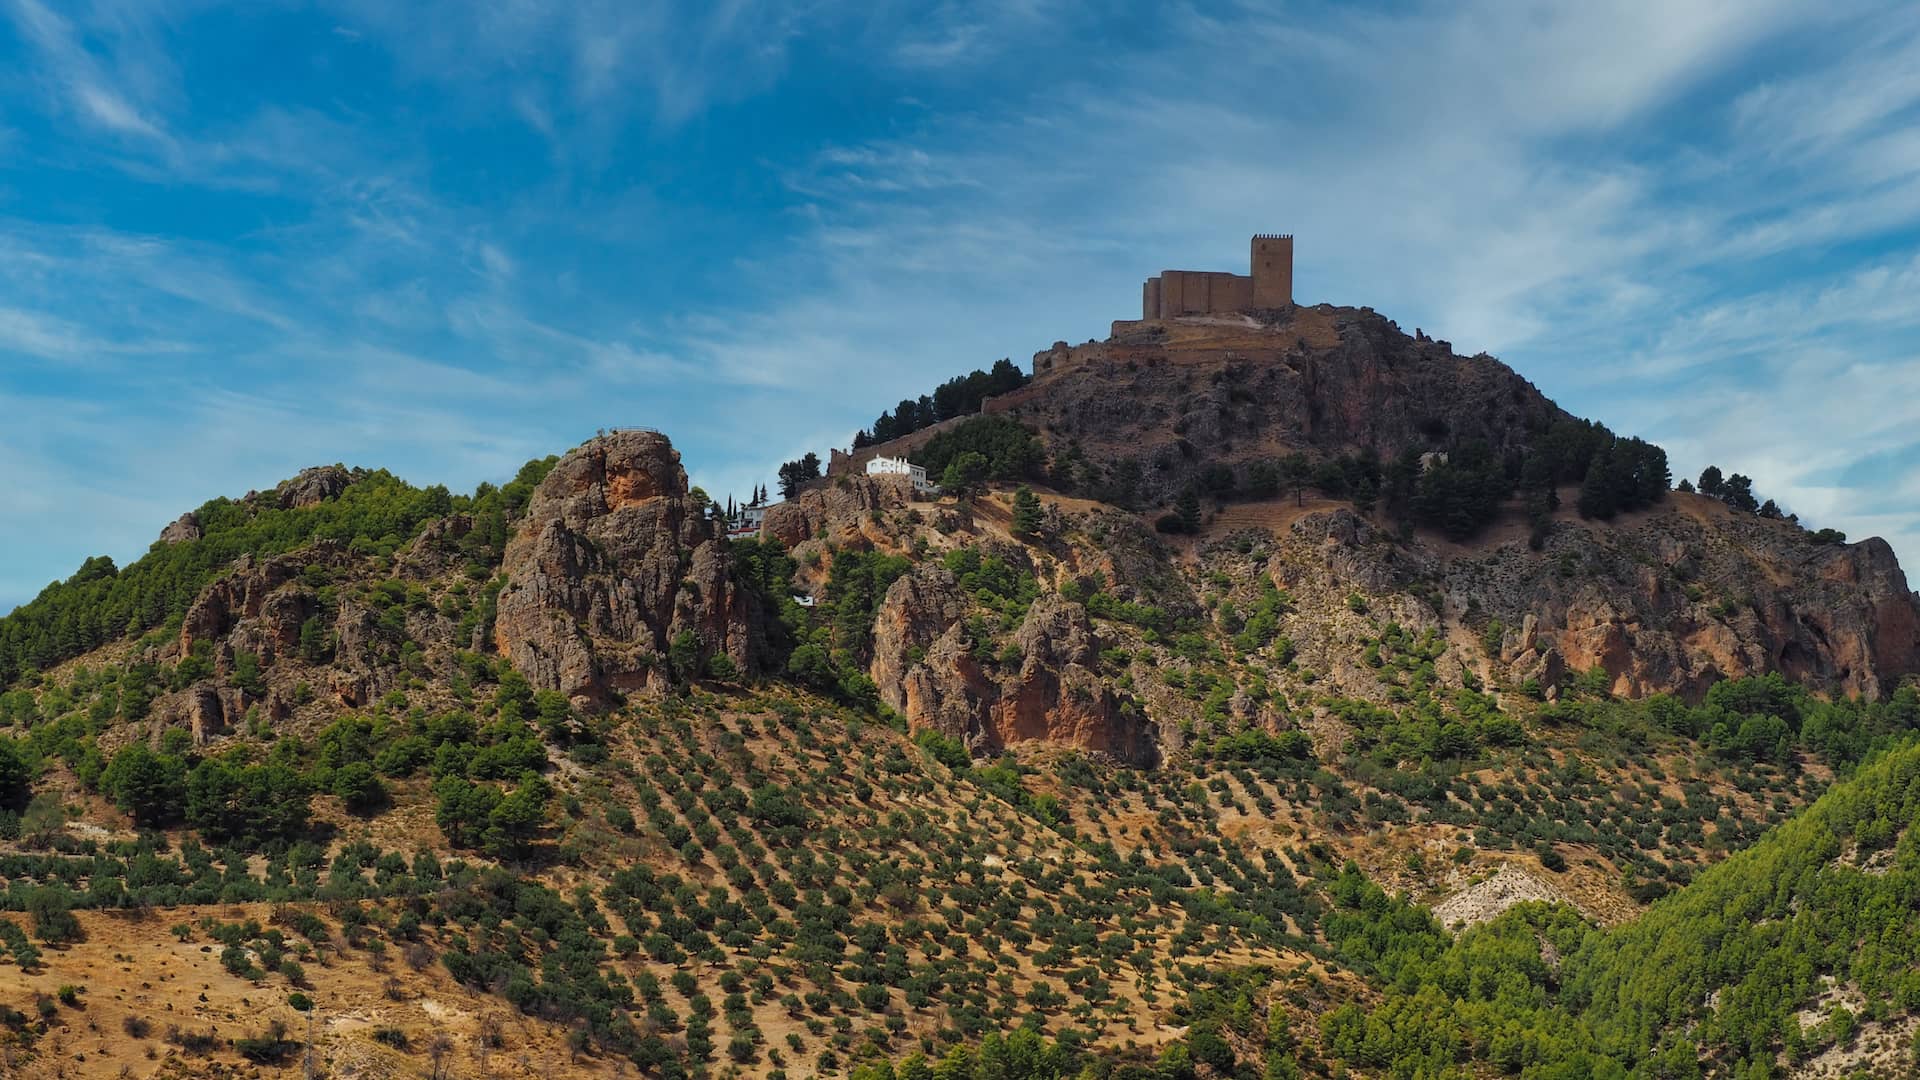 A castle sits atop a hillside, overlooking olive groves